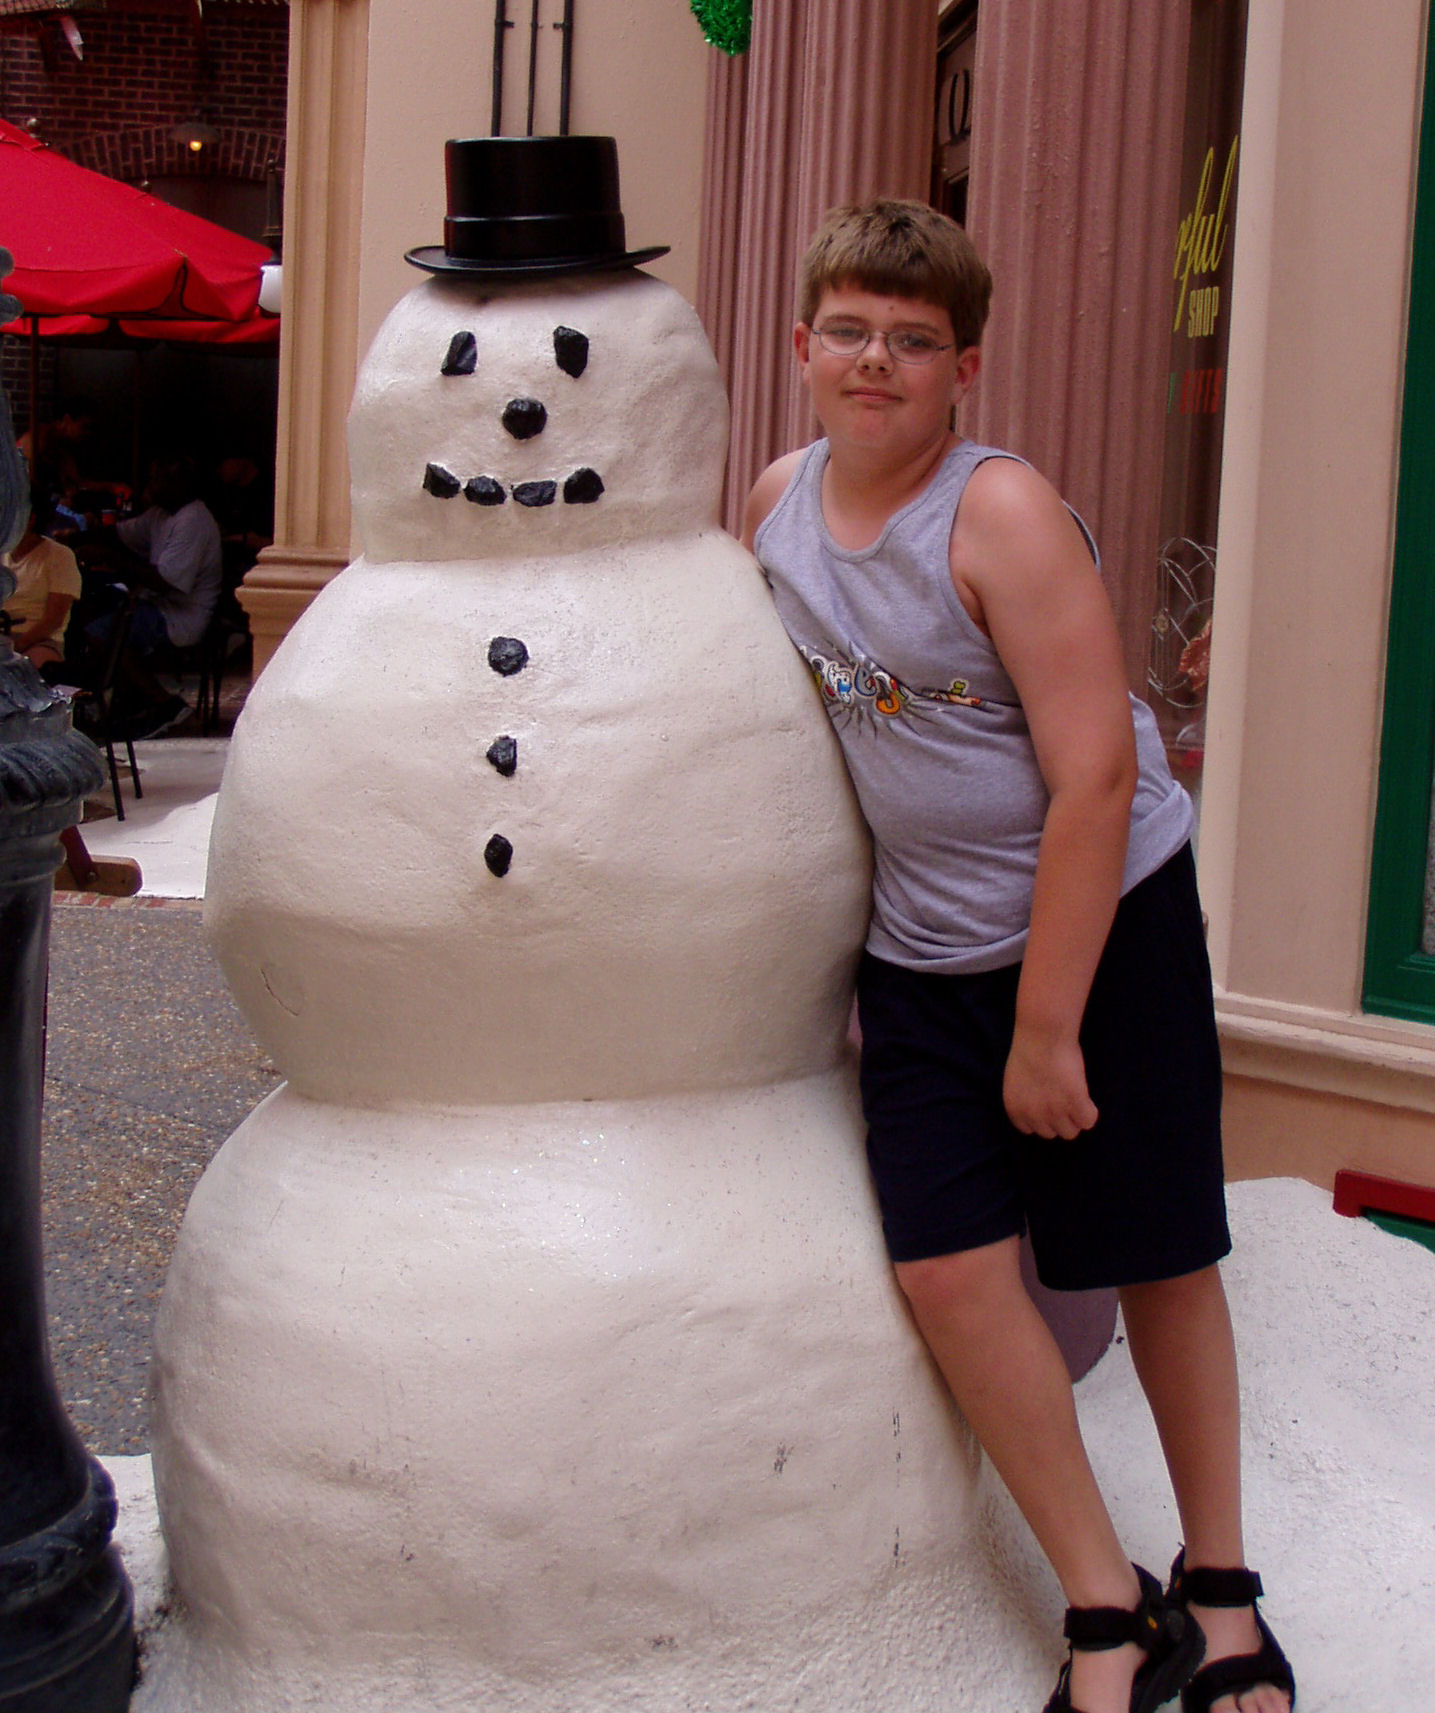 Man that snowman has been around for a long time.